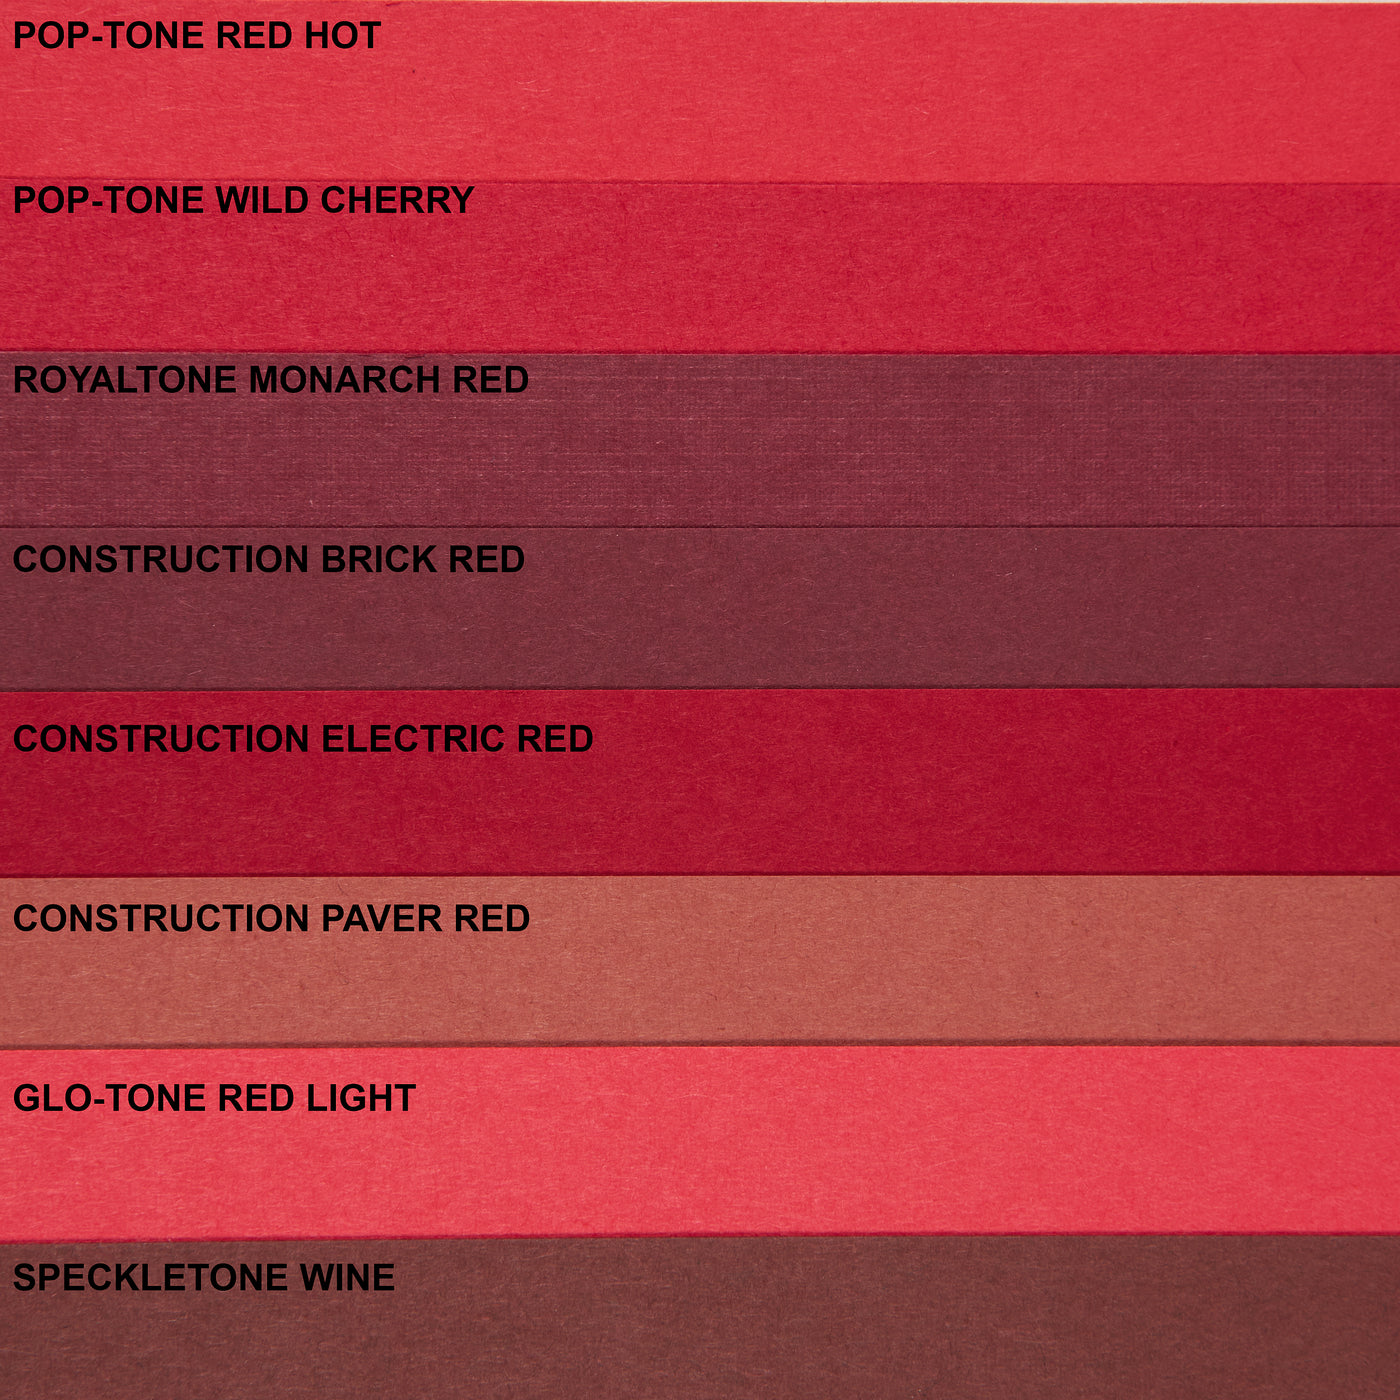 Red Hot Cardstock (Pop-Tone, Cover Weight)